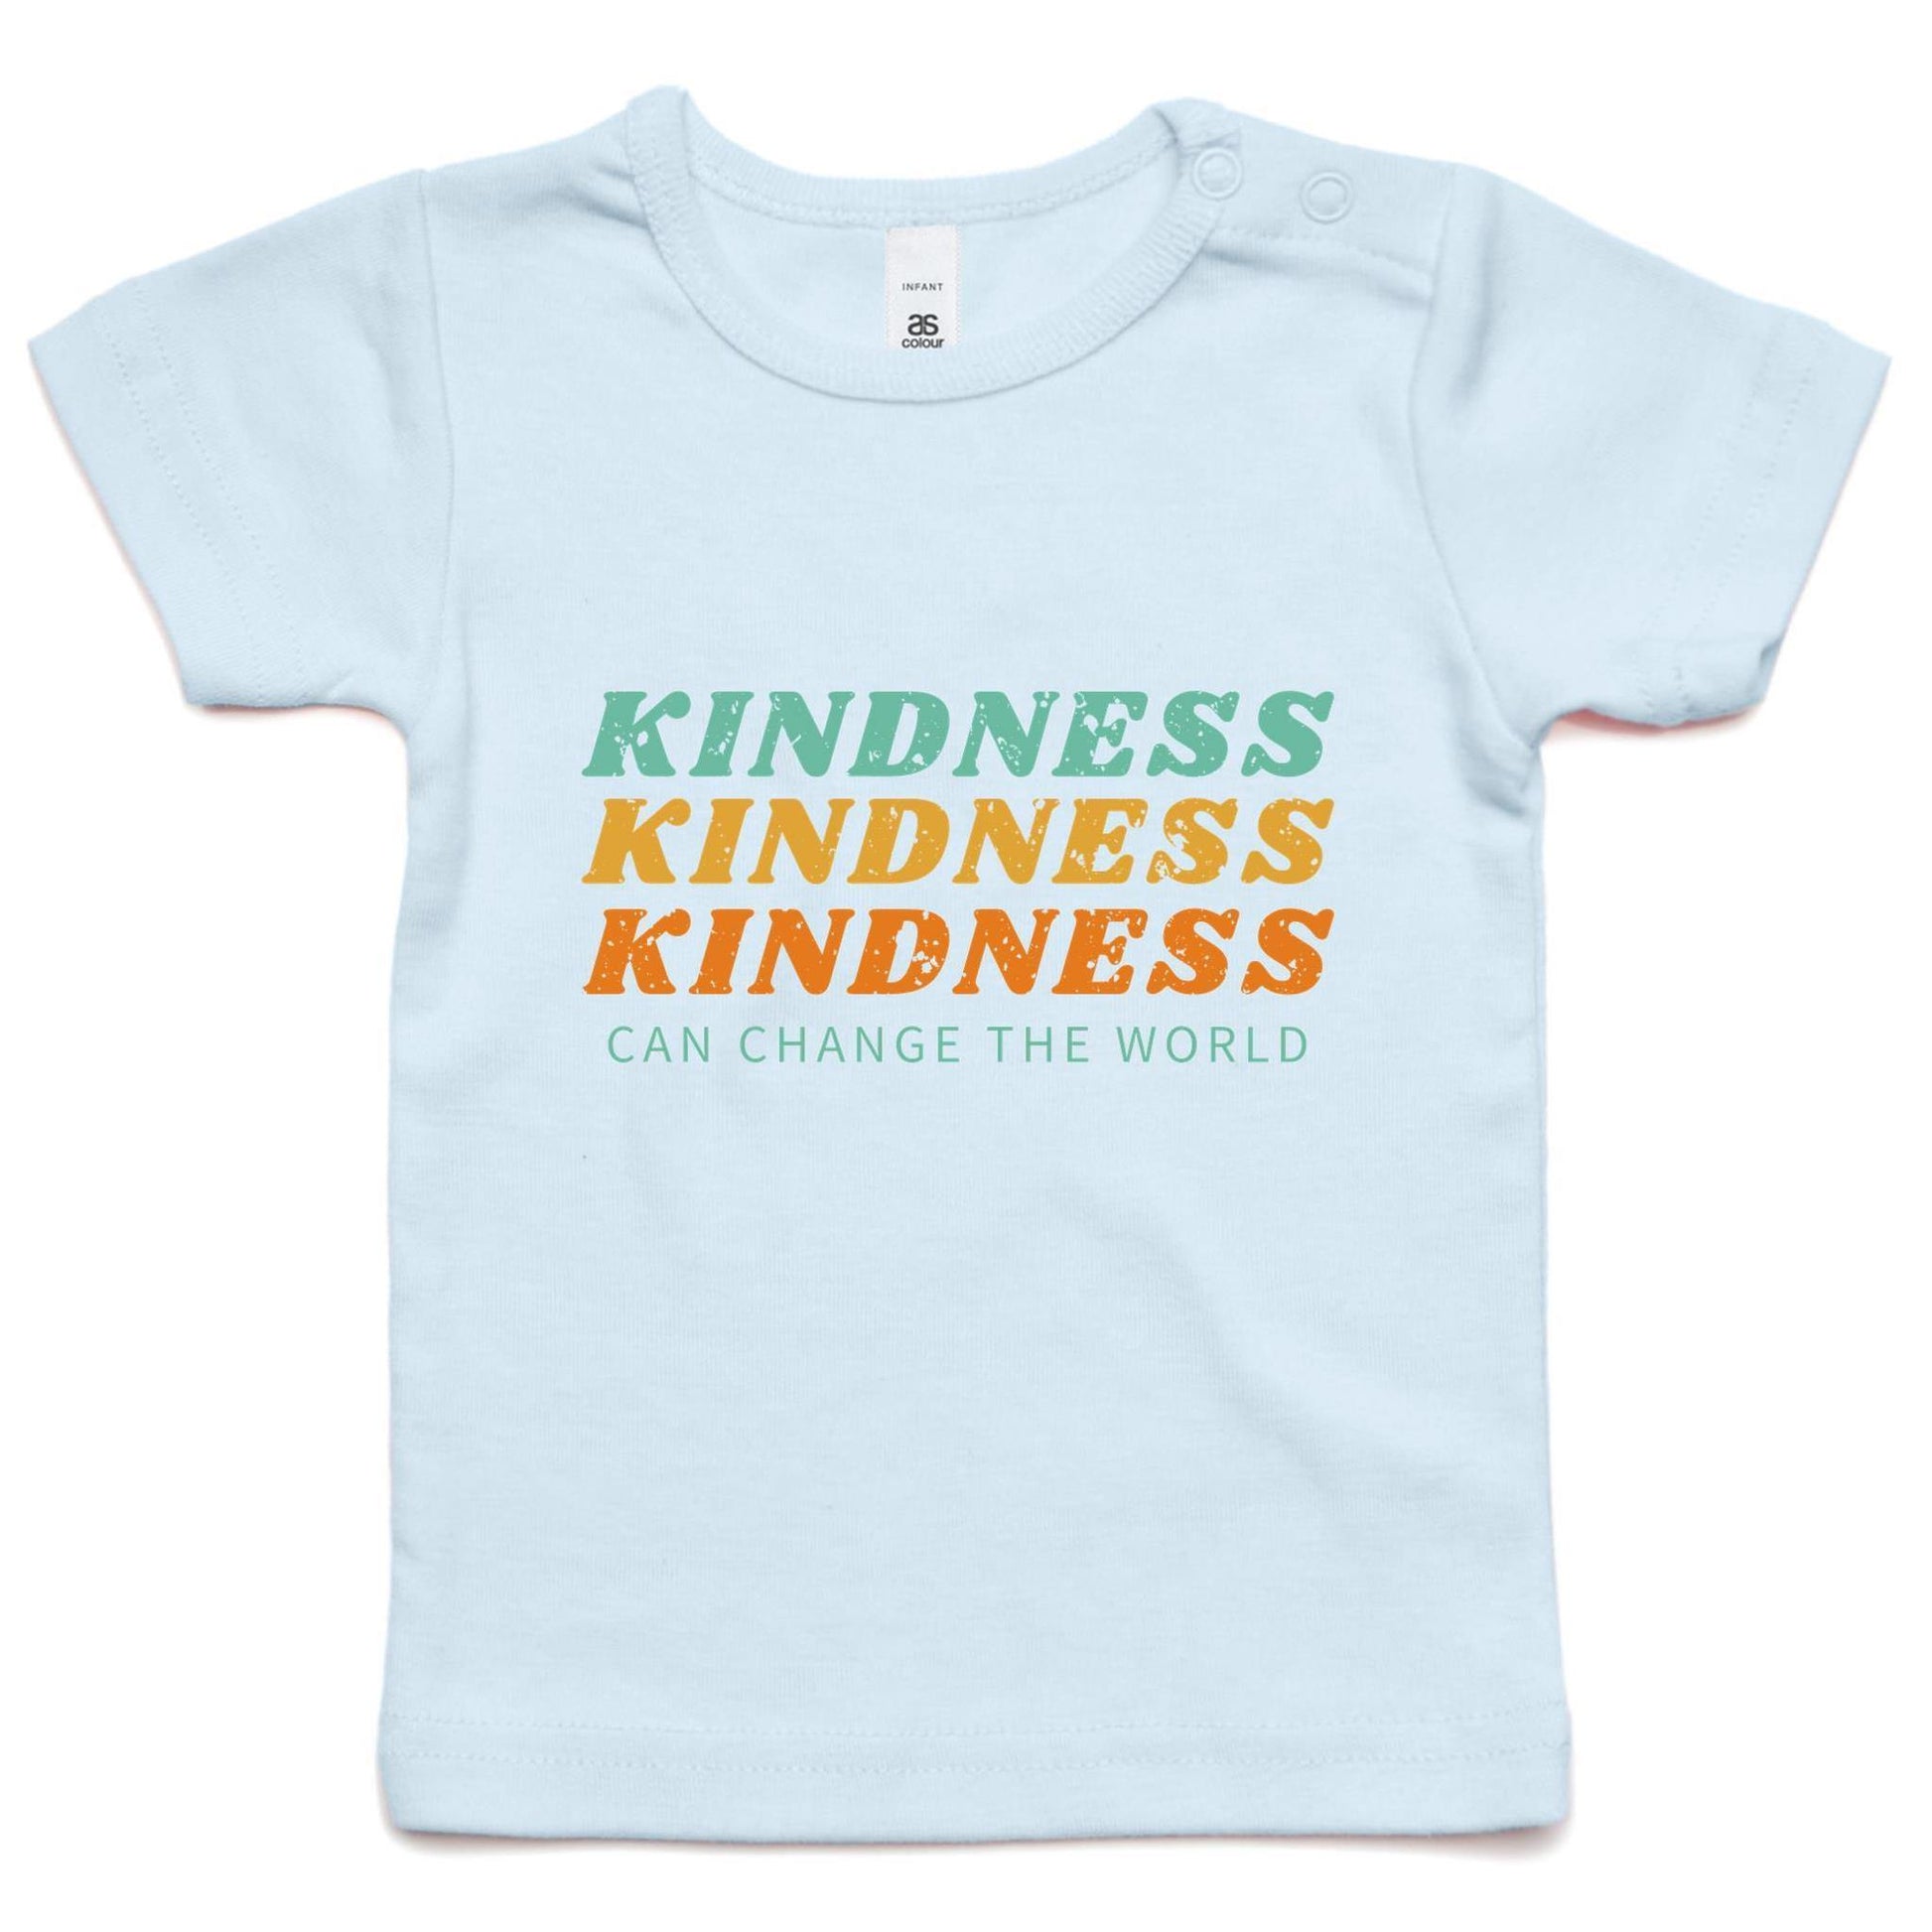 Kindness Can Change The World - Baby T-shirt Powder Blue Baby T-shirt kids